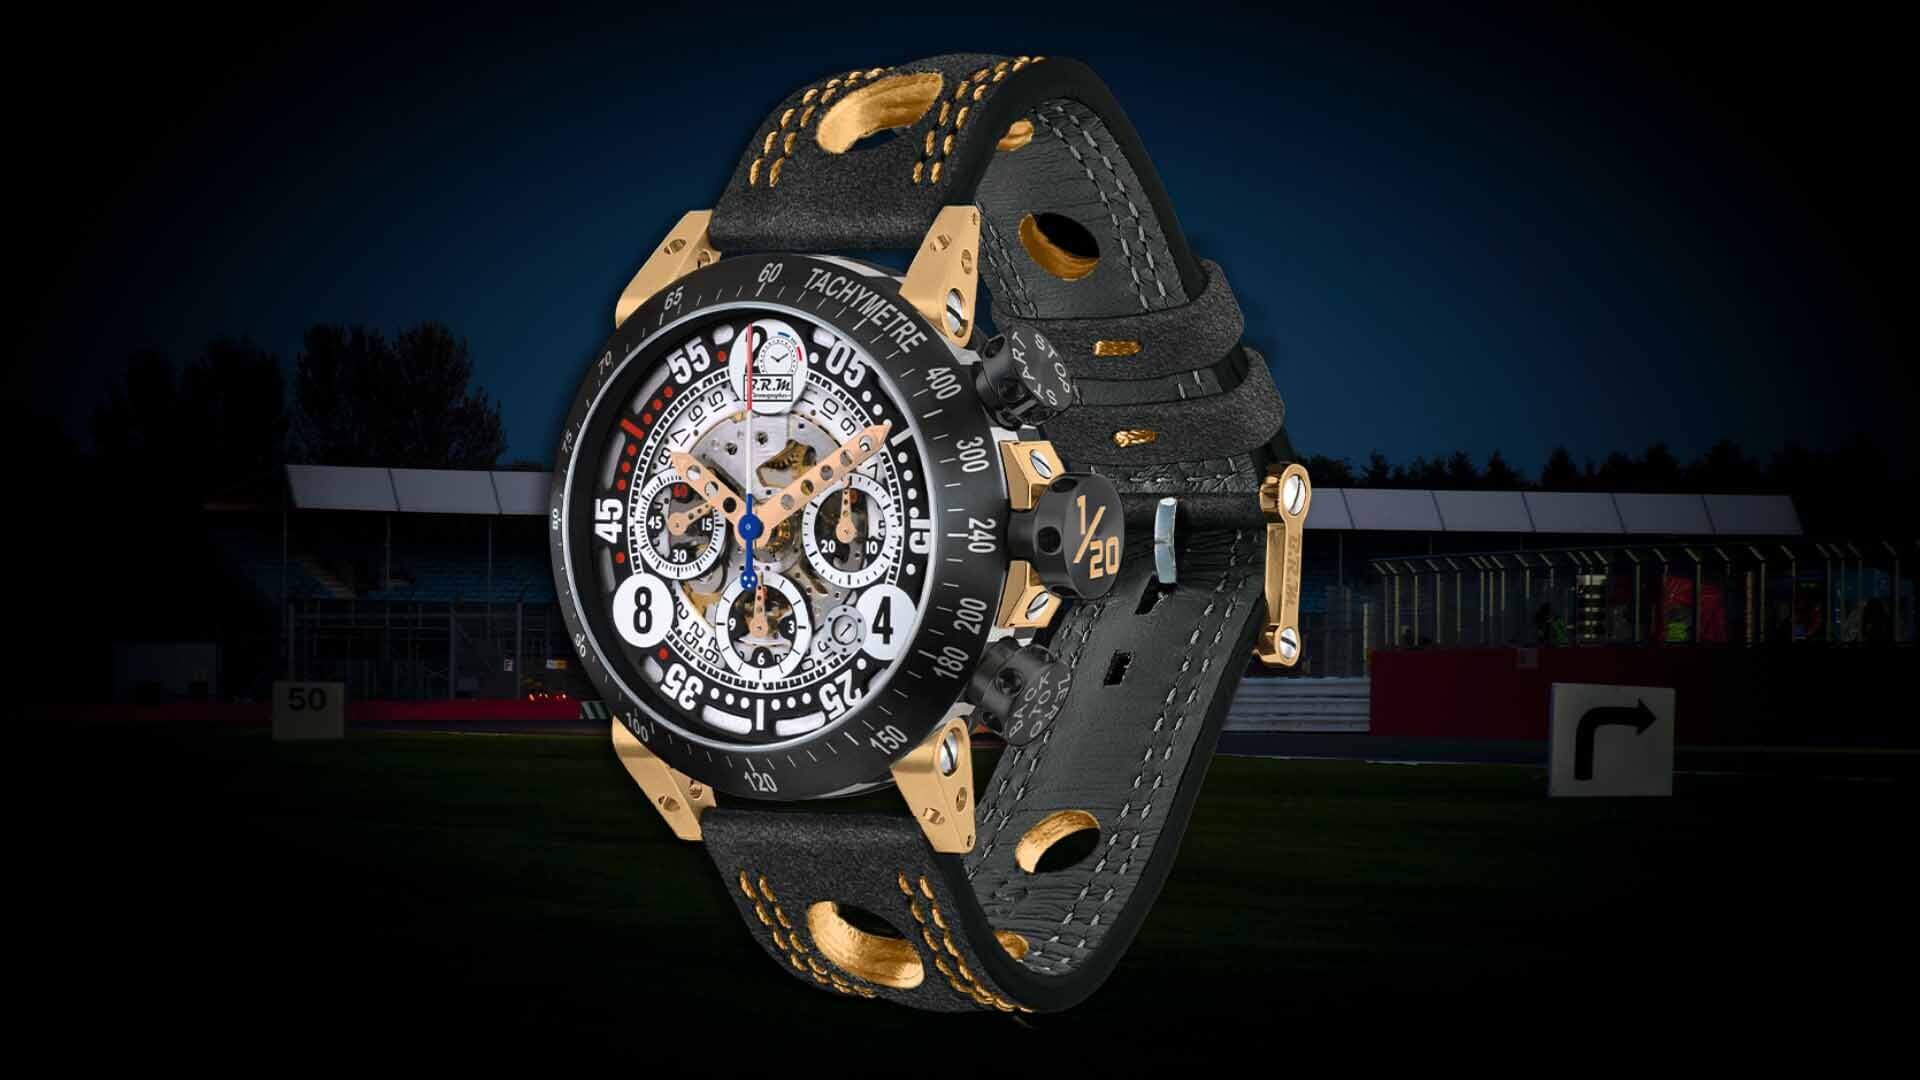 An image of a B.R.M Chronographes timepiece, on a racing track background.